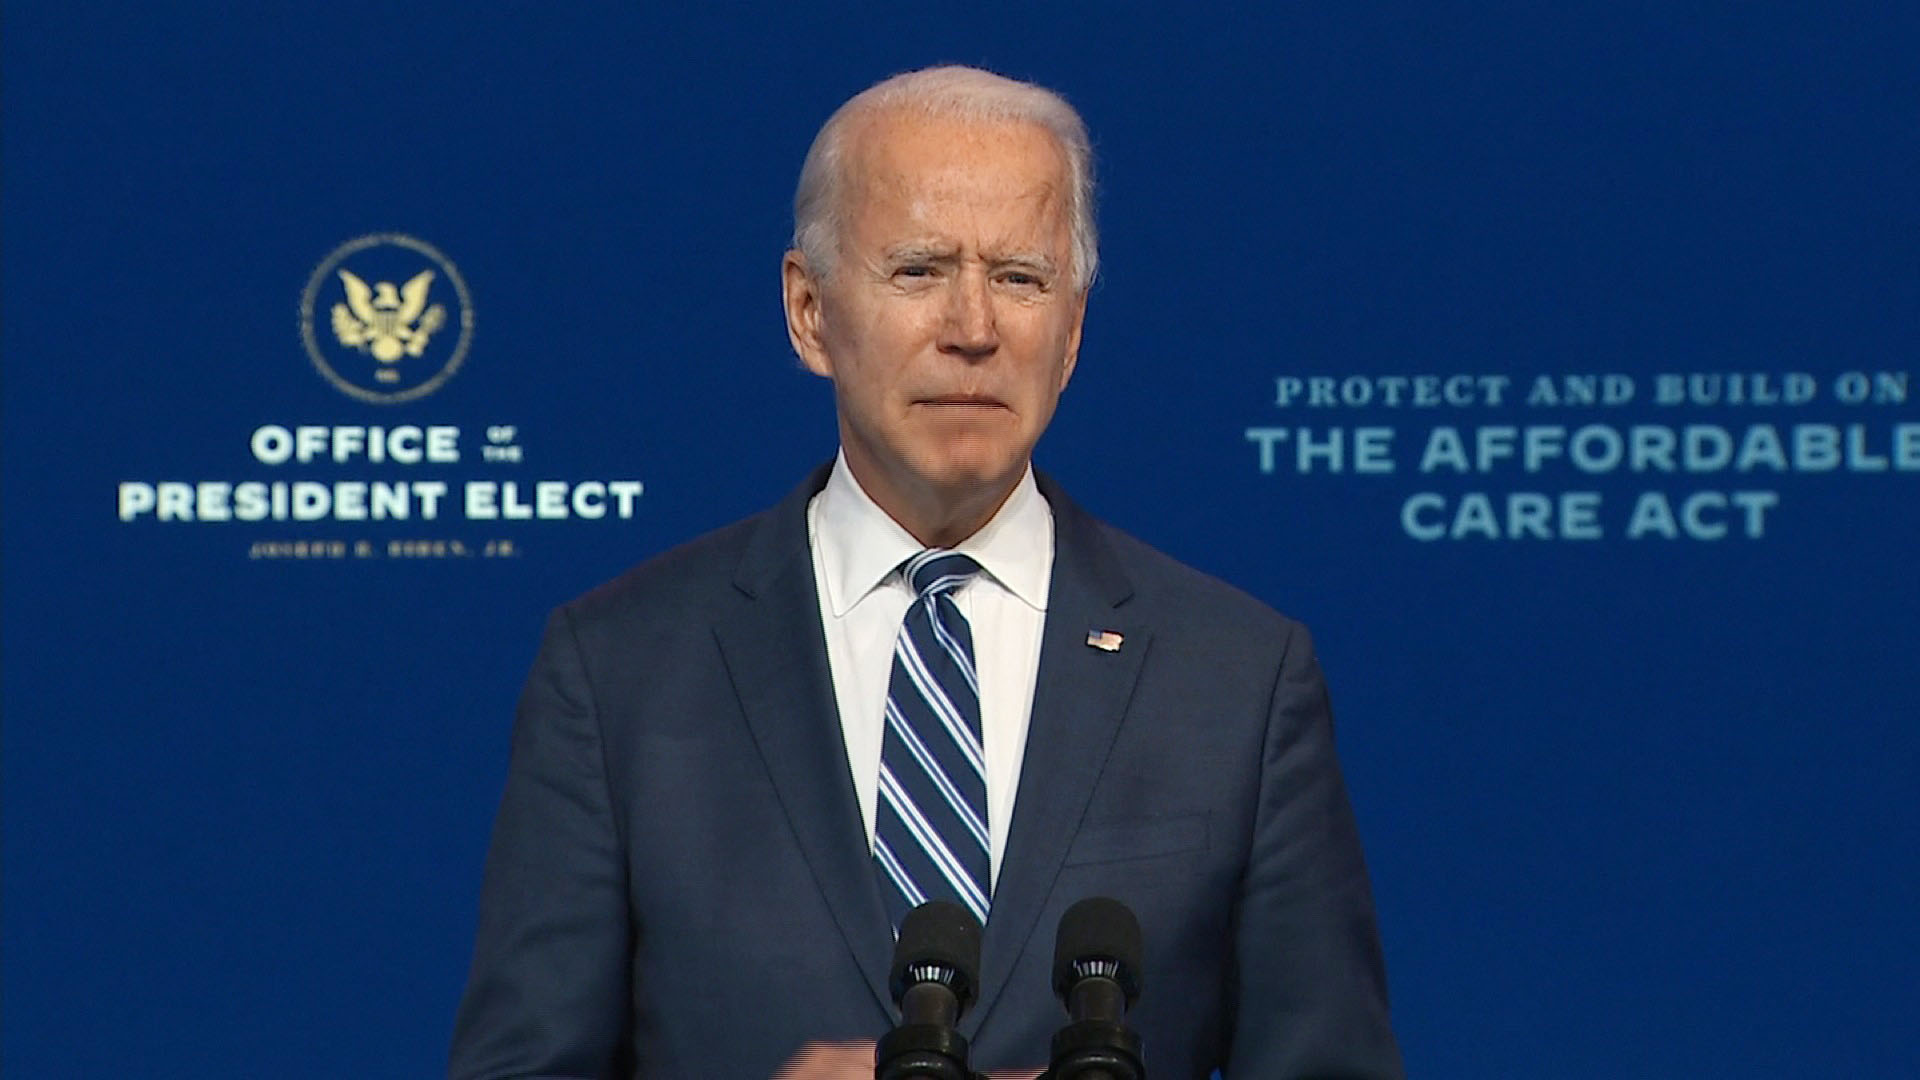 President-elect Joe Biden delivers remarks on the Affordable Care Act from Wilmington, Delaware on Tuesday, November 10. 